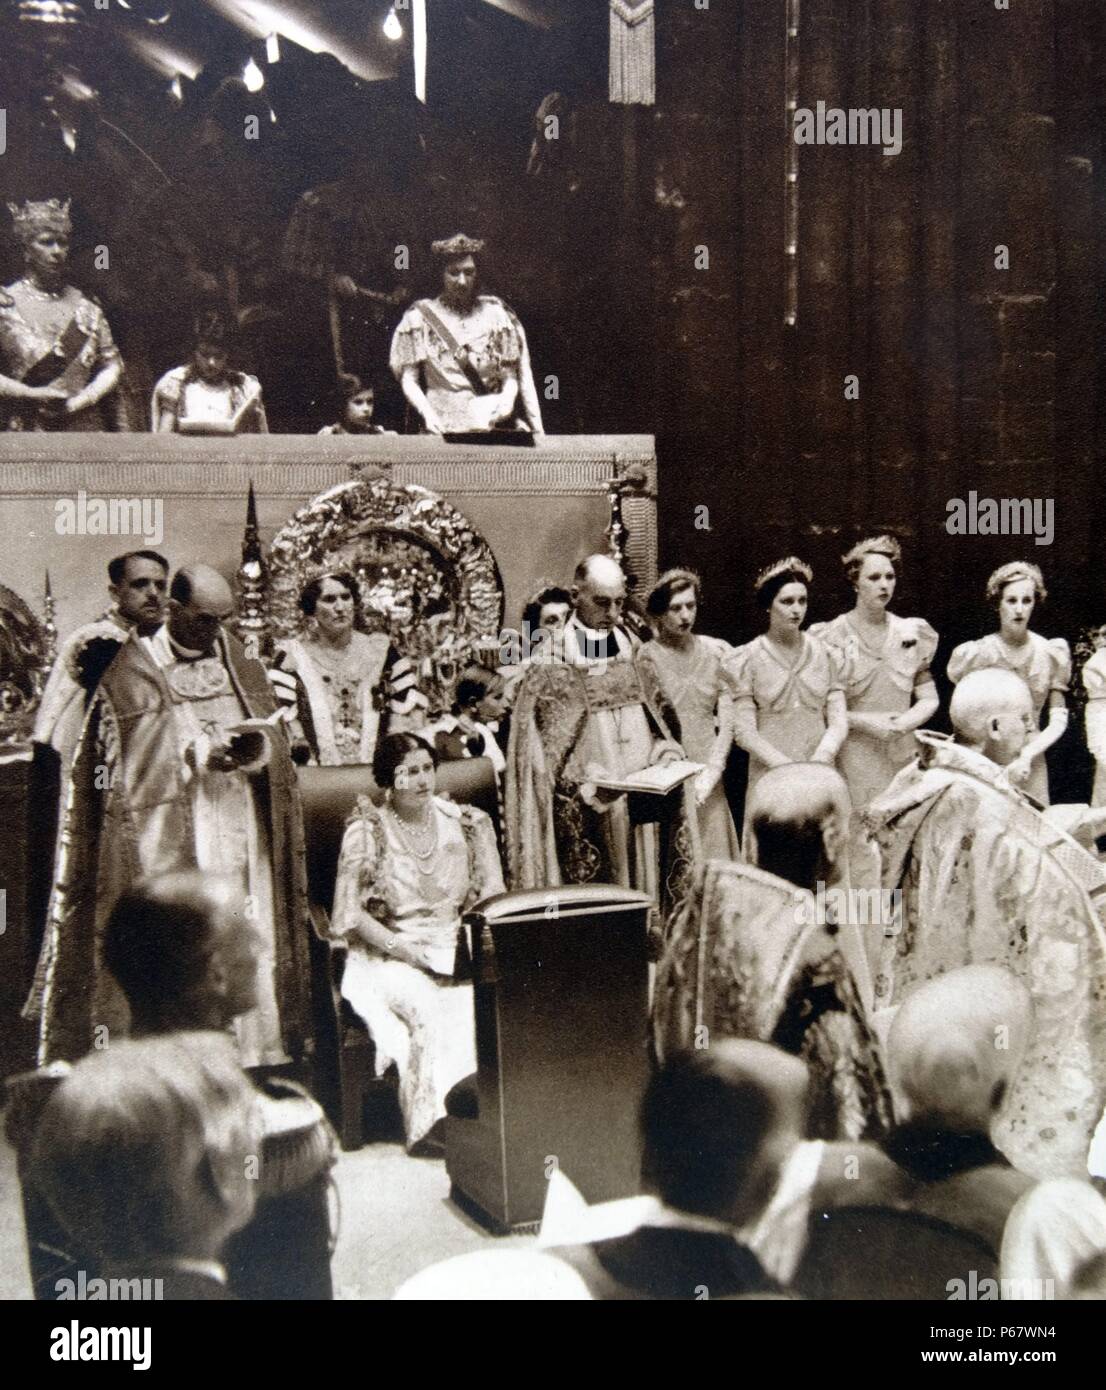 Coronation of British King George VI in Westminster Abbey. George VI (Albert Frederick Arthur George; 14 December 1895 – 6 February 1952) King of the United Kingdom and the Dominions of the British Commonwealth from 11 December 1936 until his death. He was the last Emperor of India and the first Head of the Commonwealth Stock Photo